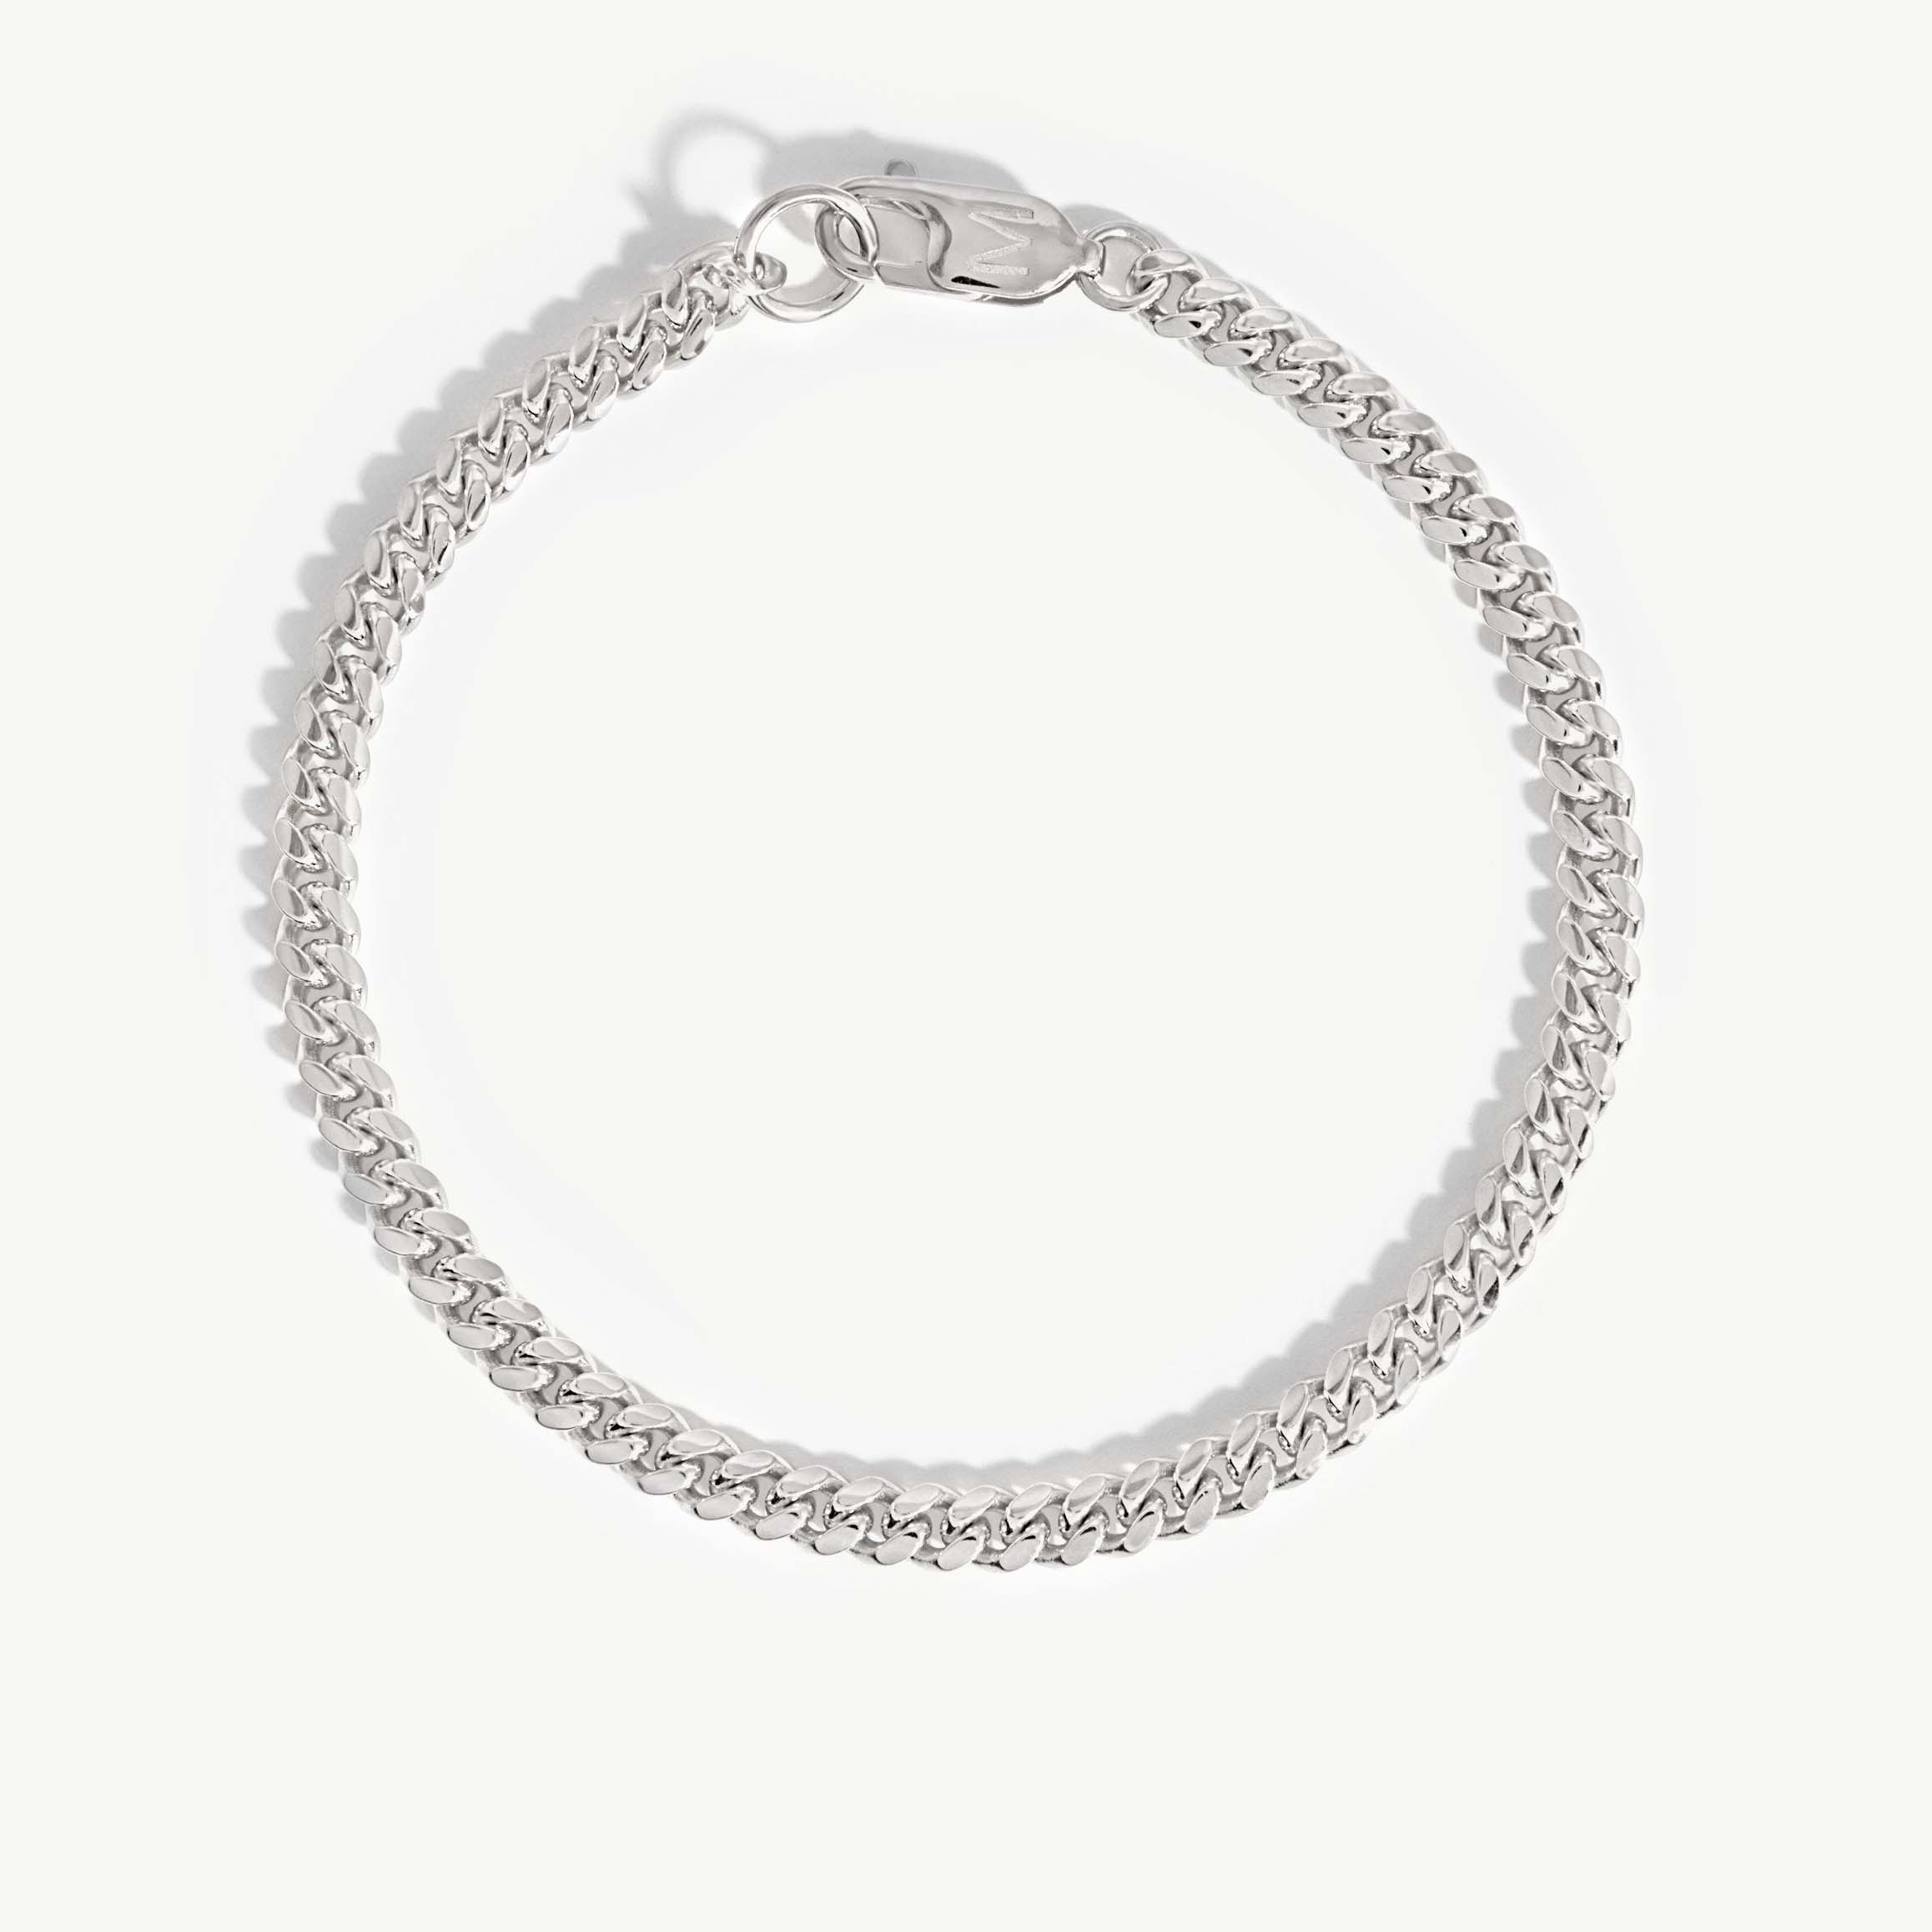 thailand silver wholesale custom chain braclelet jewelry manufacturer